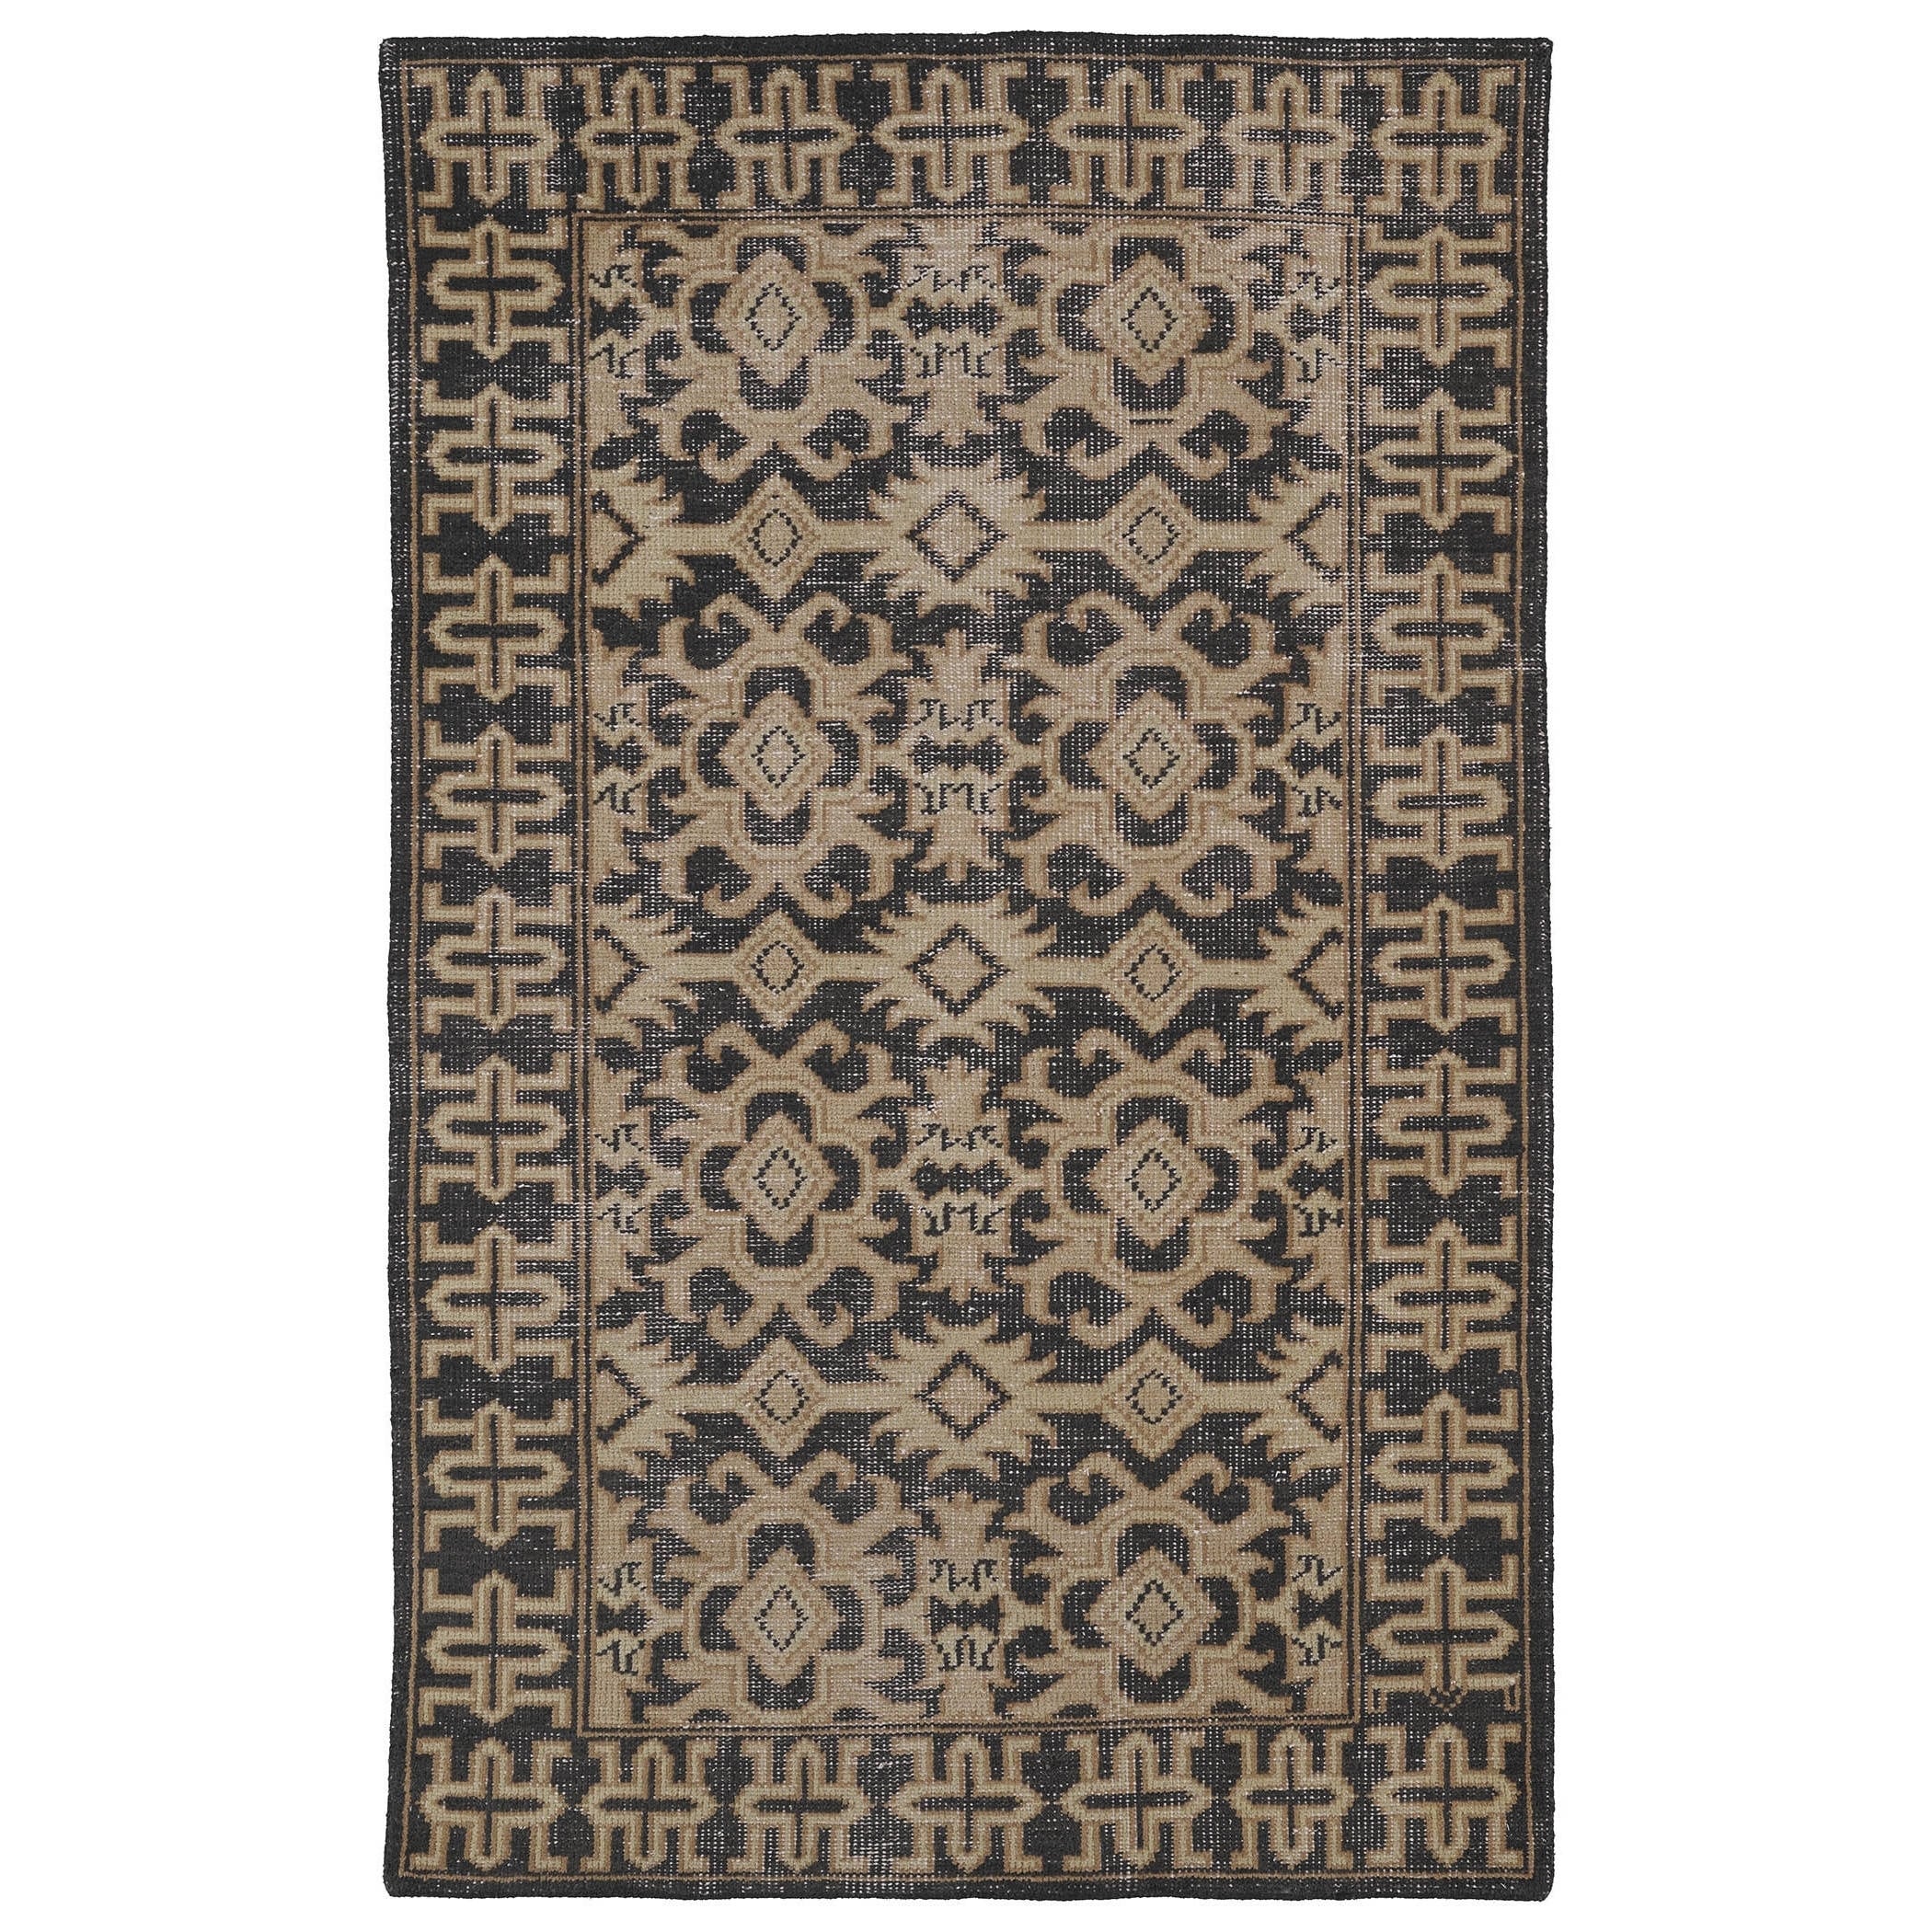 Hand knotted Vintage Replica Chocolate Brown Wool Rug (40 X 60)